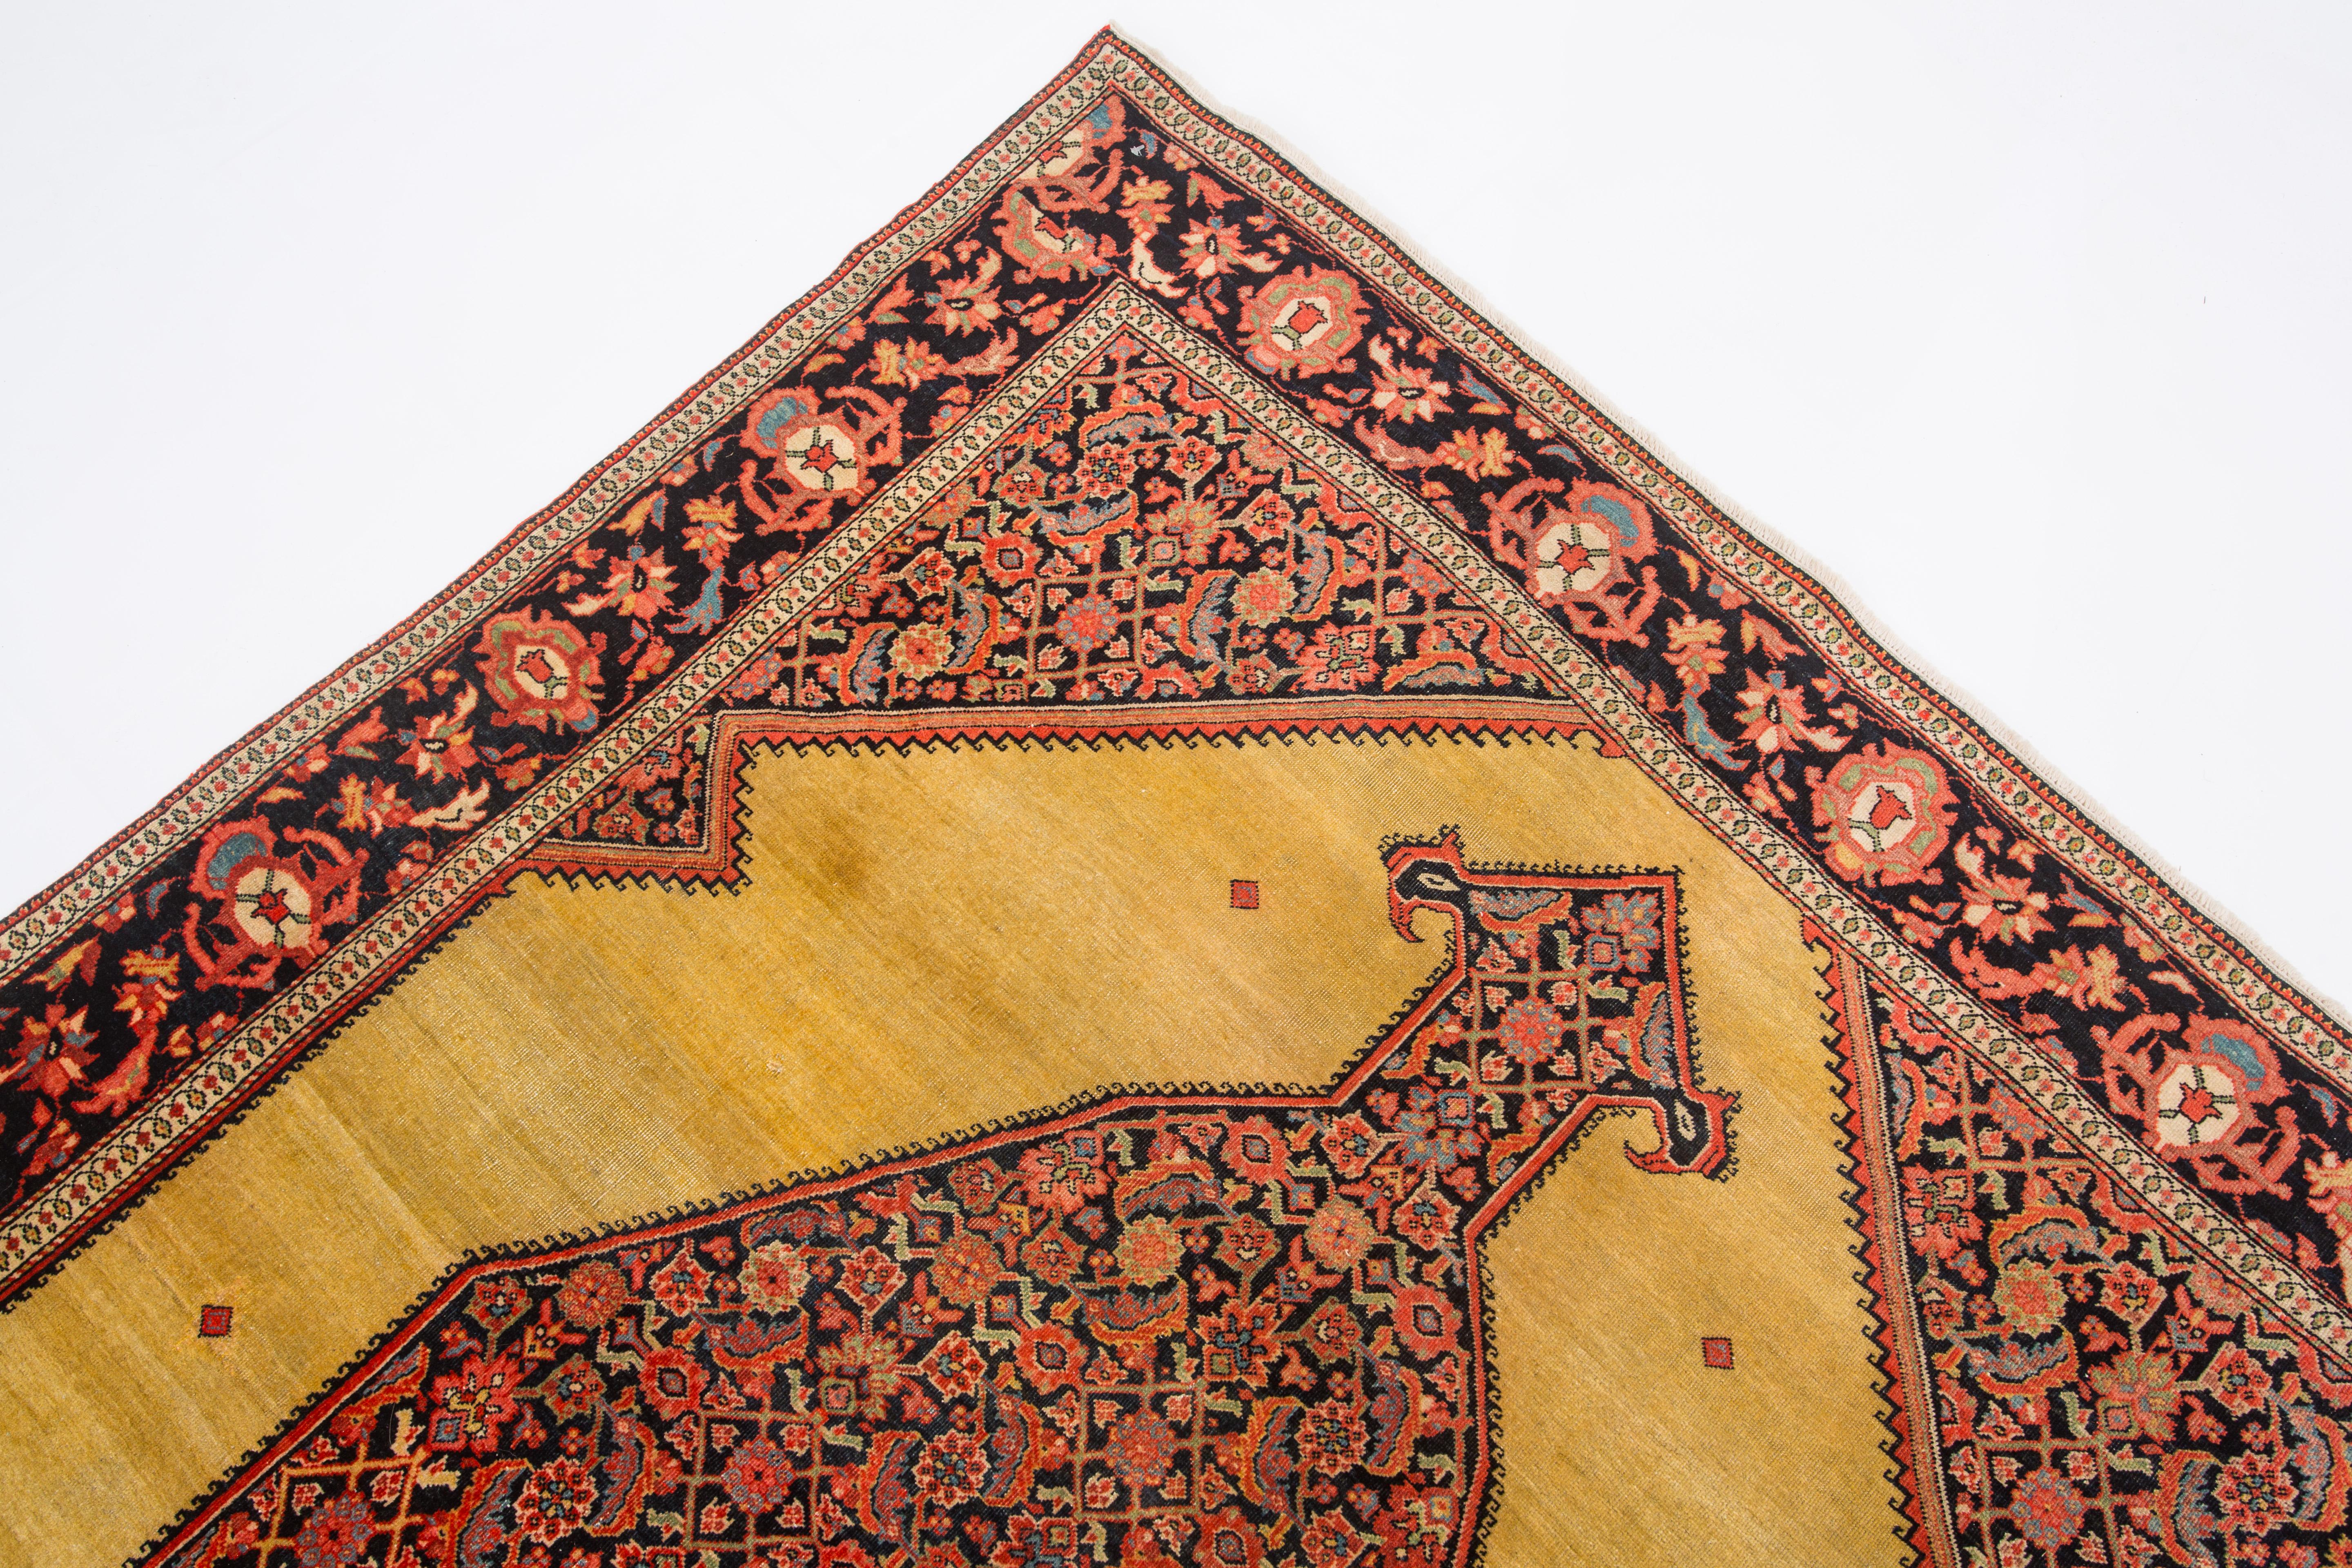 Woven High Collectible 19th Century Ferahan Sarouk, Princely, at Short Term Reduction For Sale